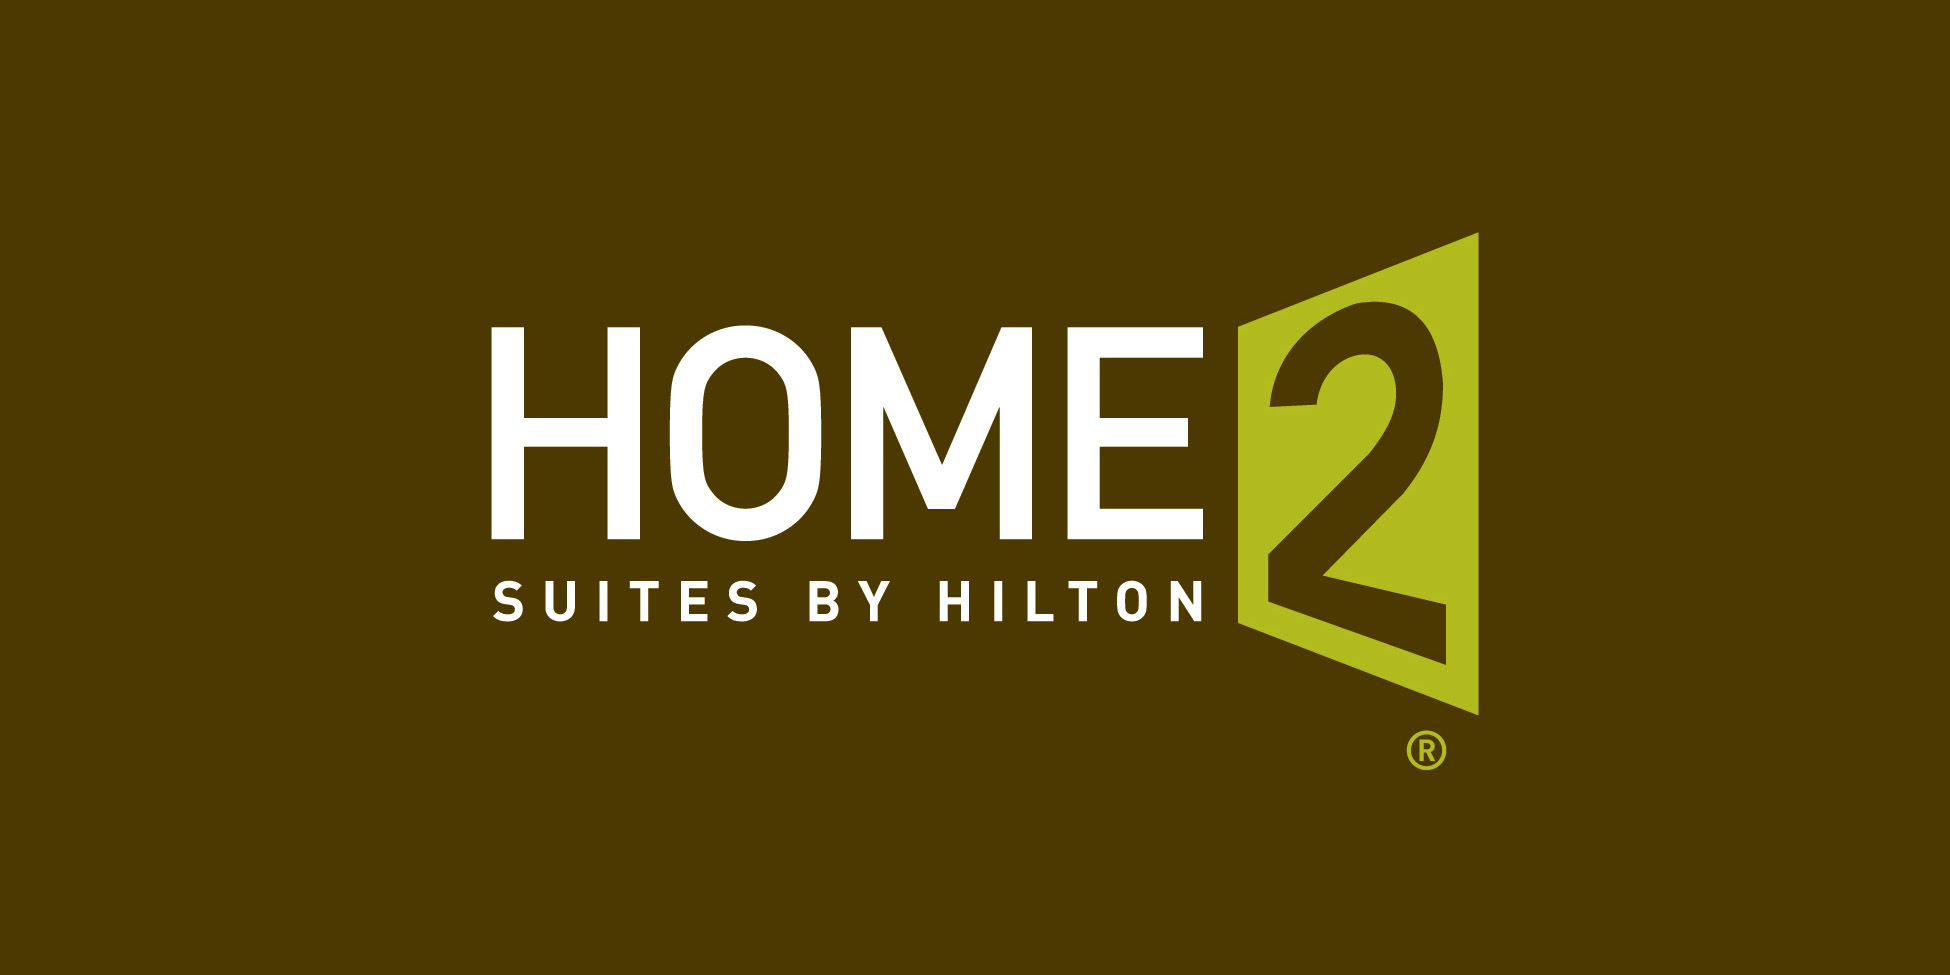 Home2 Suites by Hilton Tucson Airport Celebrates Topping Off - Tucson's Newest Extended-Stay Hotel